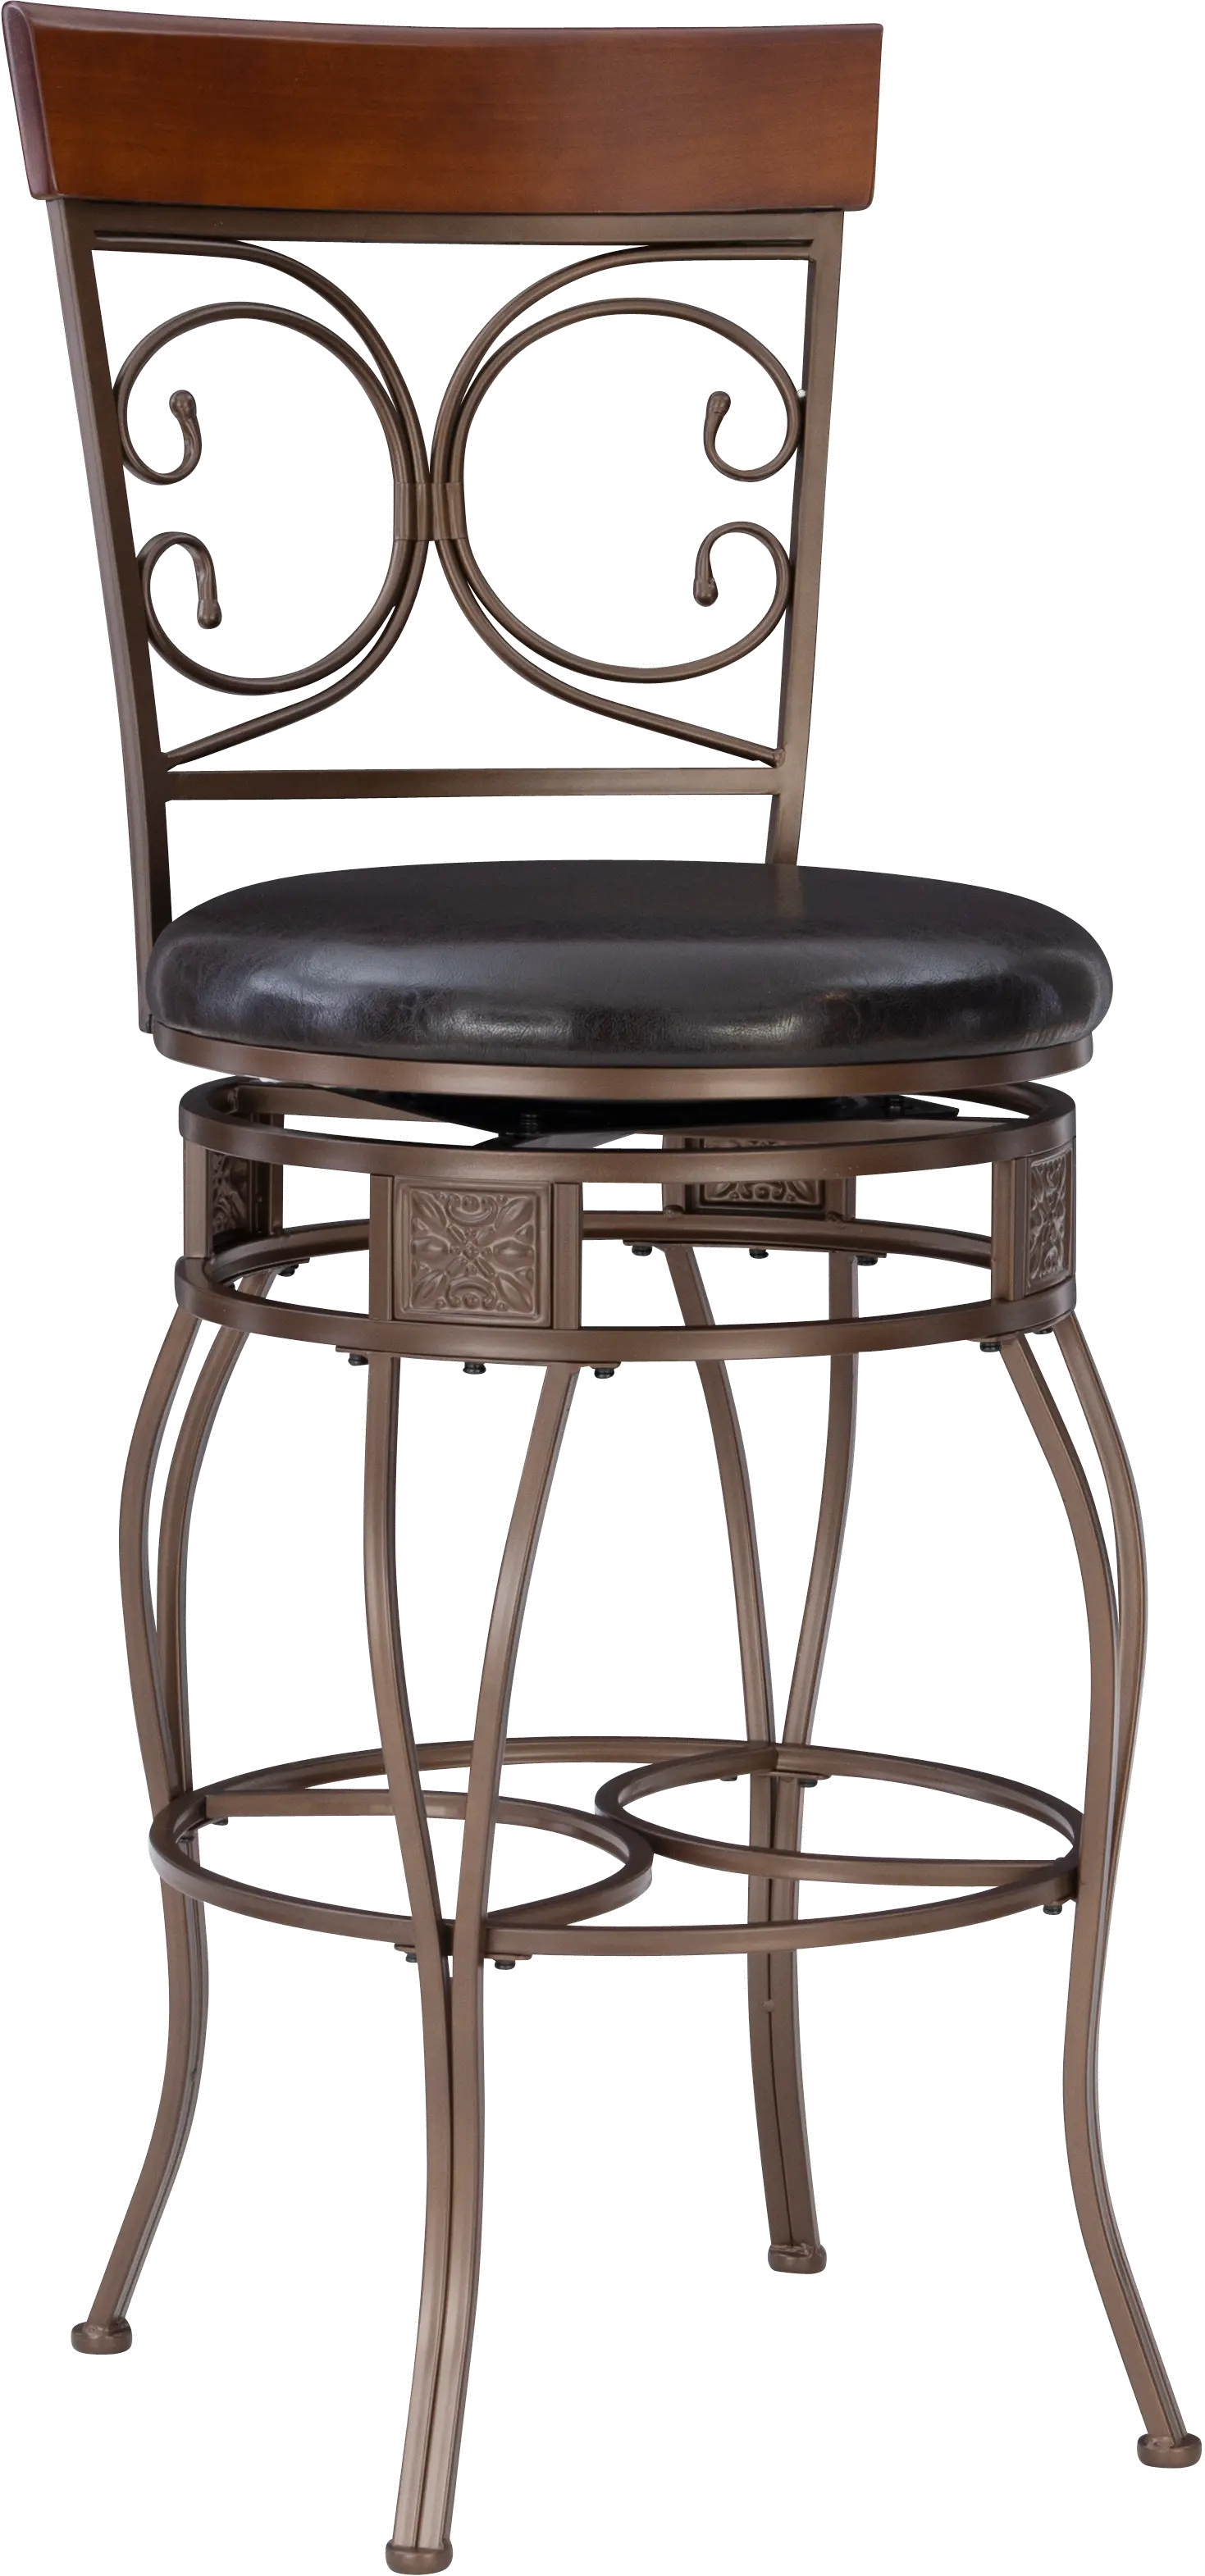 Photos - Chair L Powell Bria Bronze Big and Tall Barstool 938-851